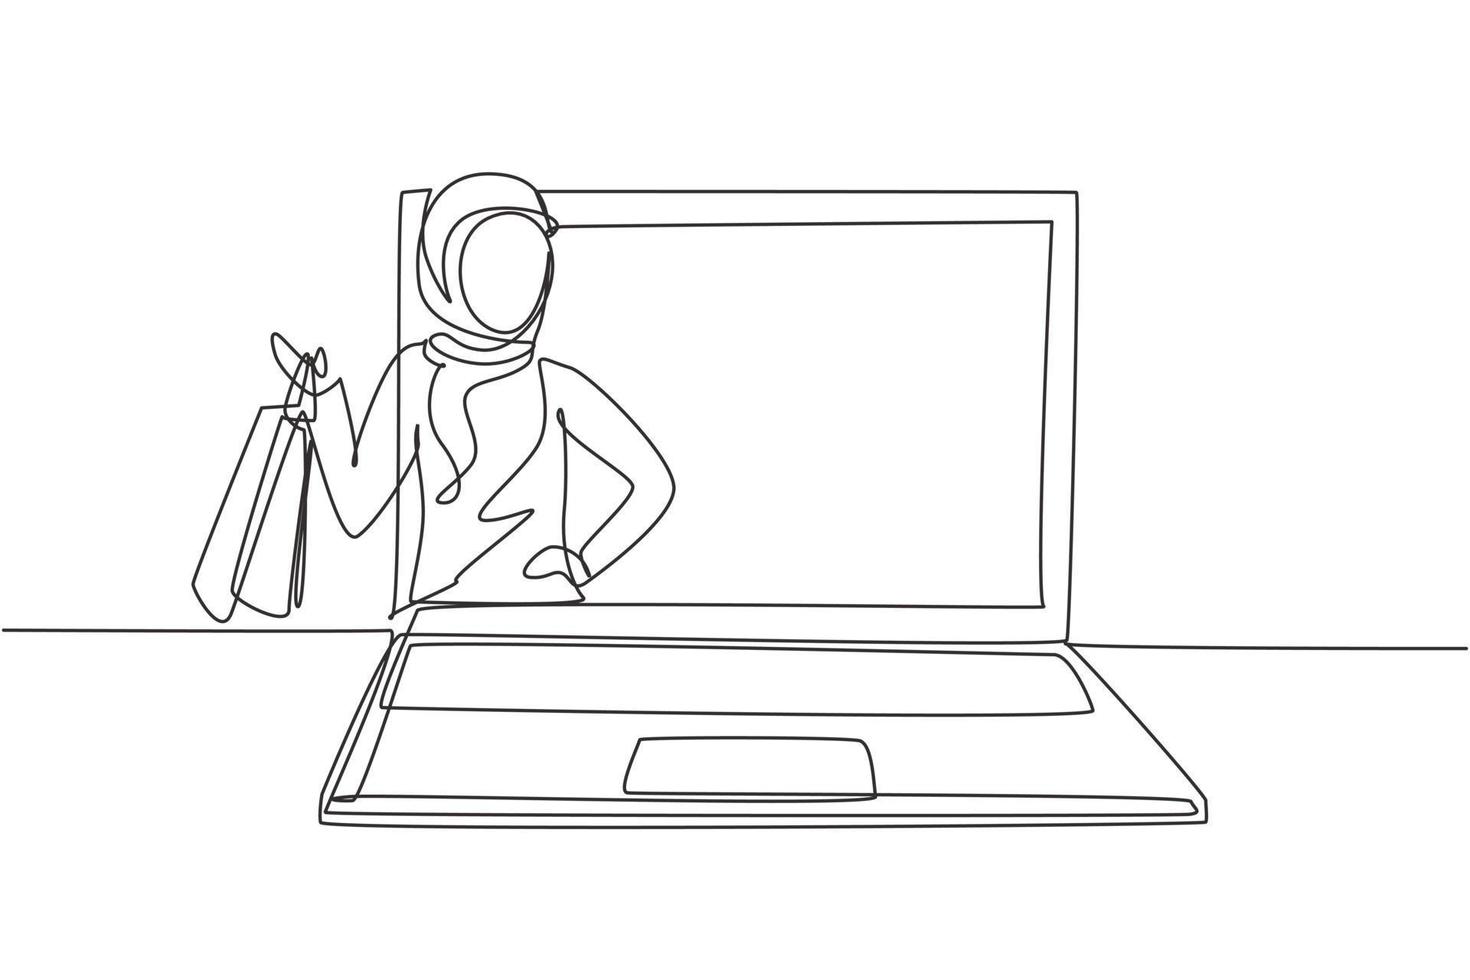 Single one line drawing young Arabian woman coming out of laptop screen holding shopping bags. Digital lifestyle and consumerism concept. Modern continuous line draw design graphic vector illustration